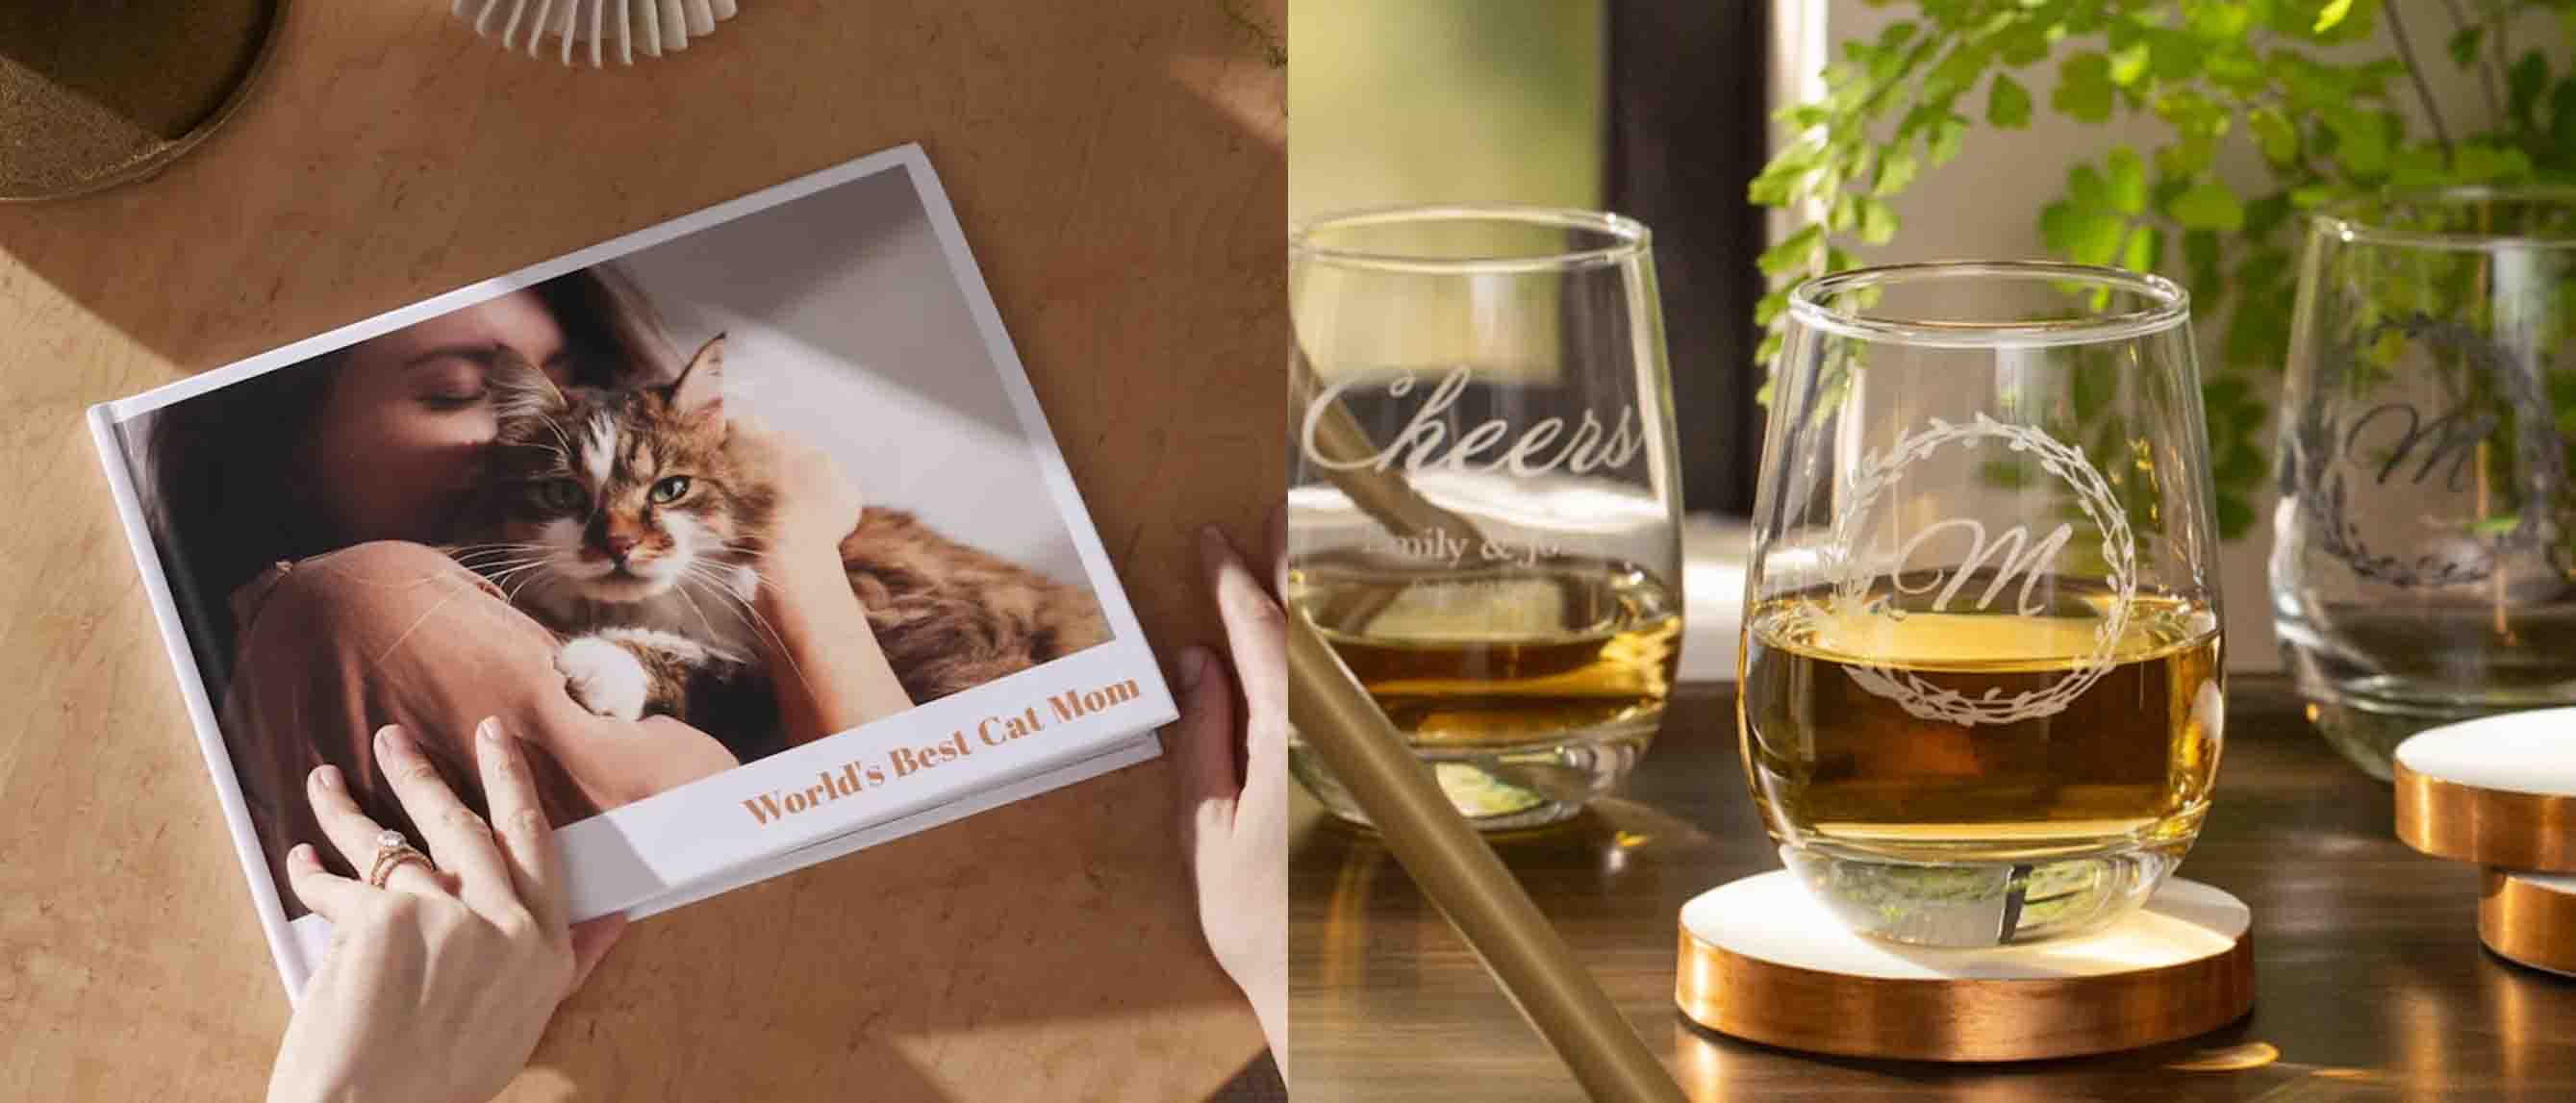 Image of photobook and stemless wine glasses